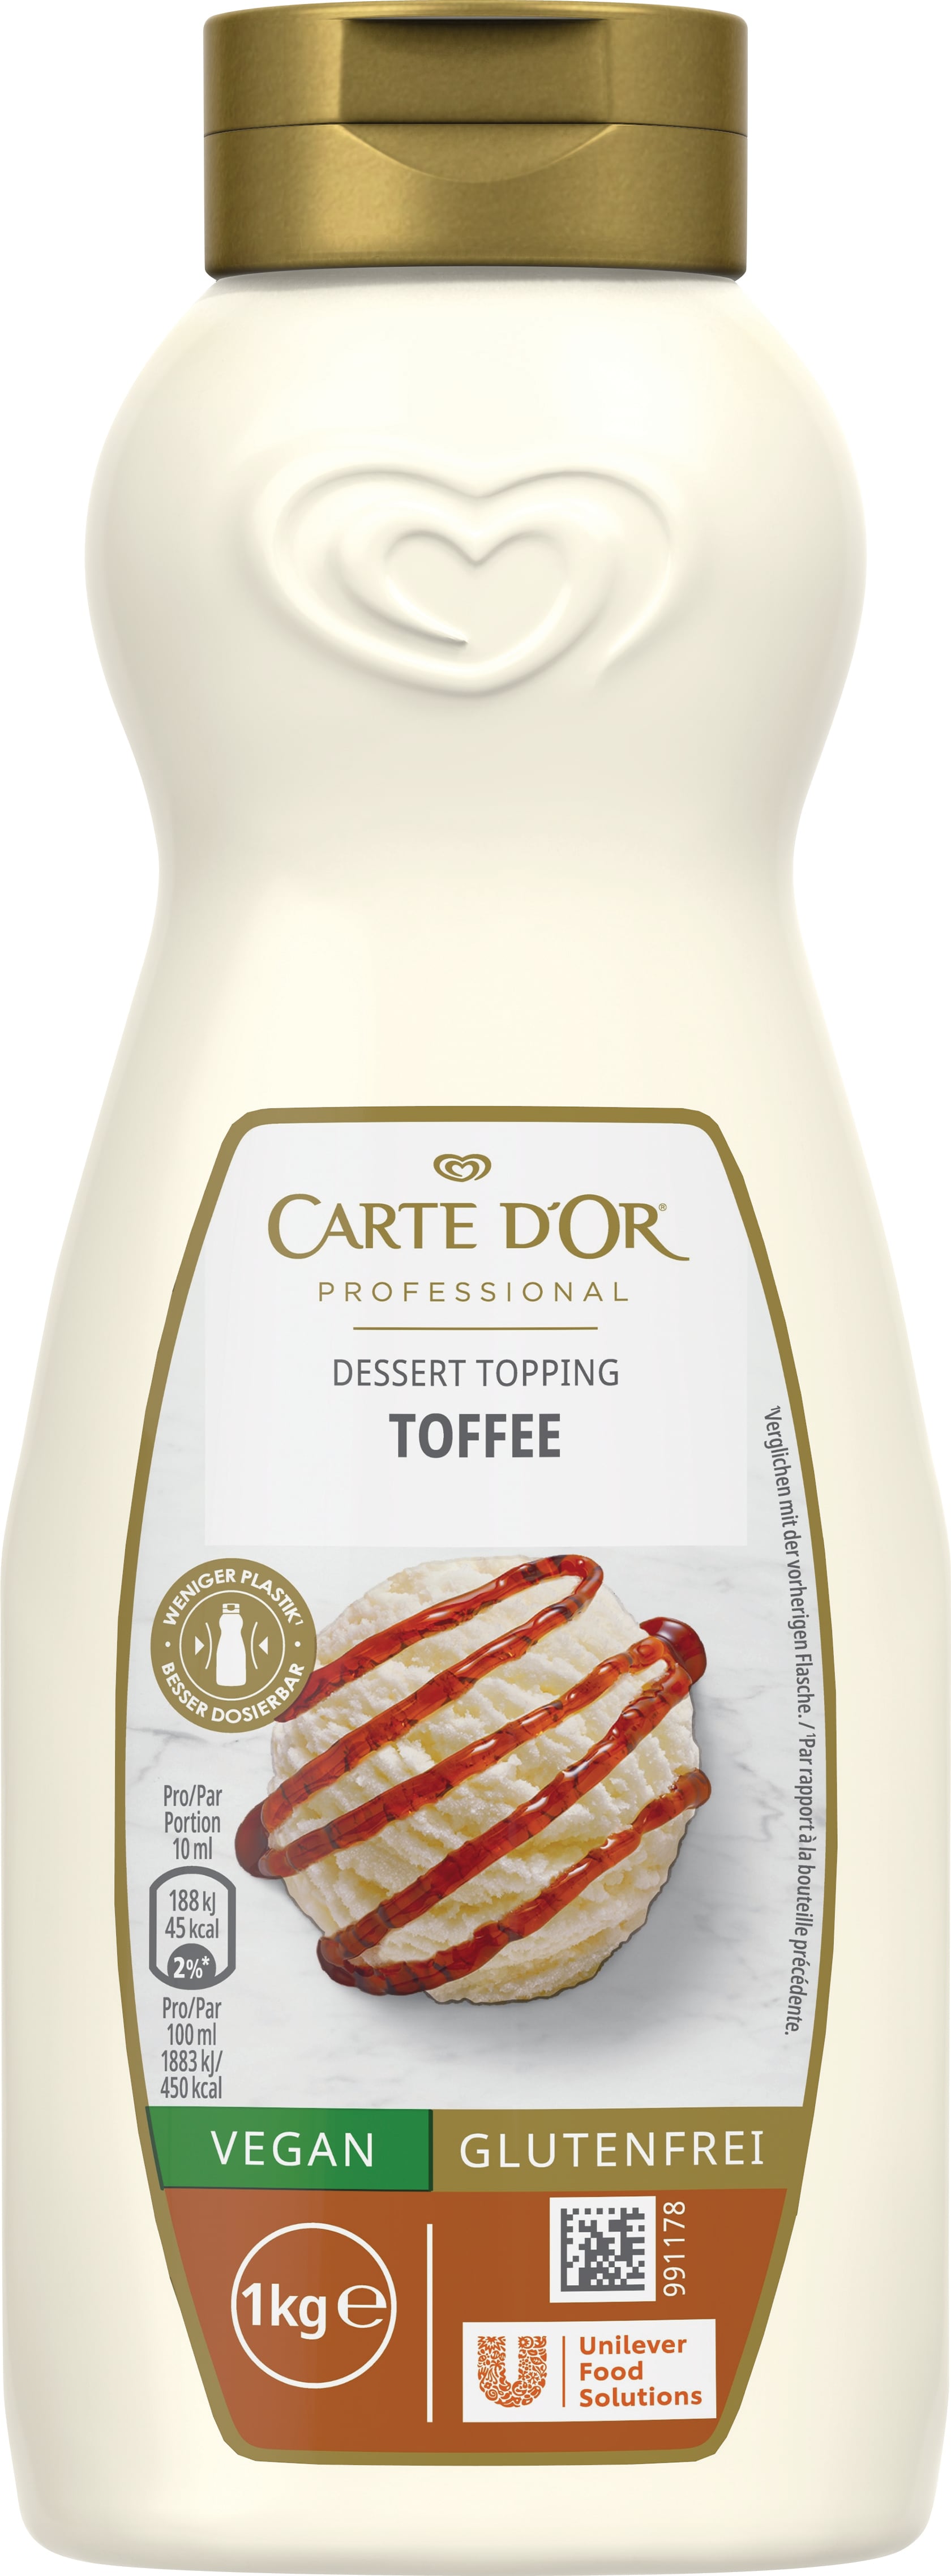 Carte D'or Dessert Topping Toffee 1 KG - 